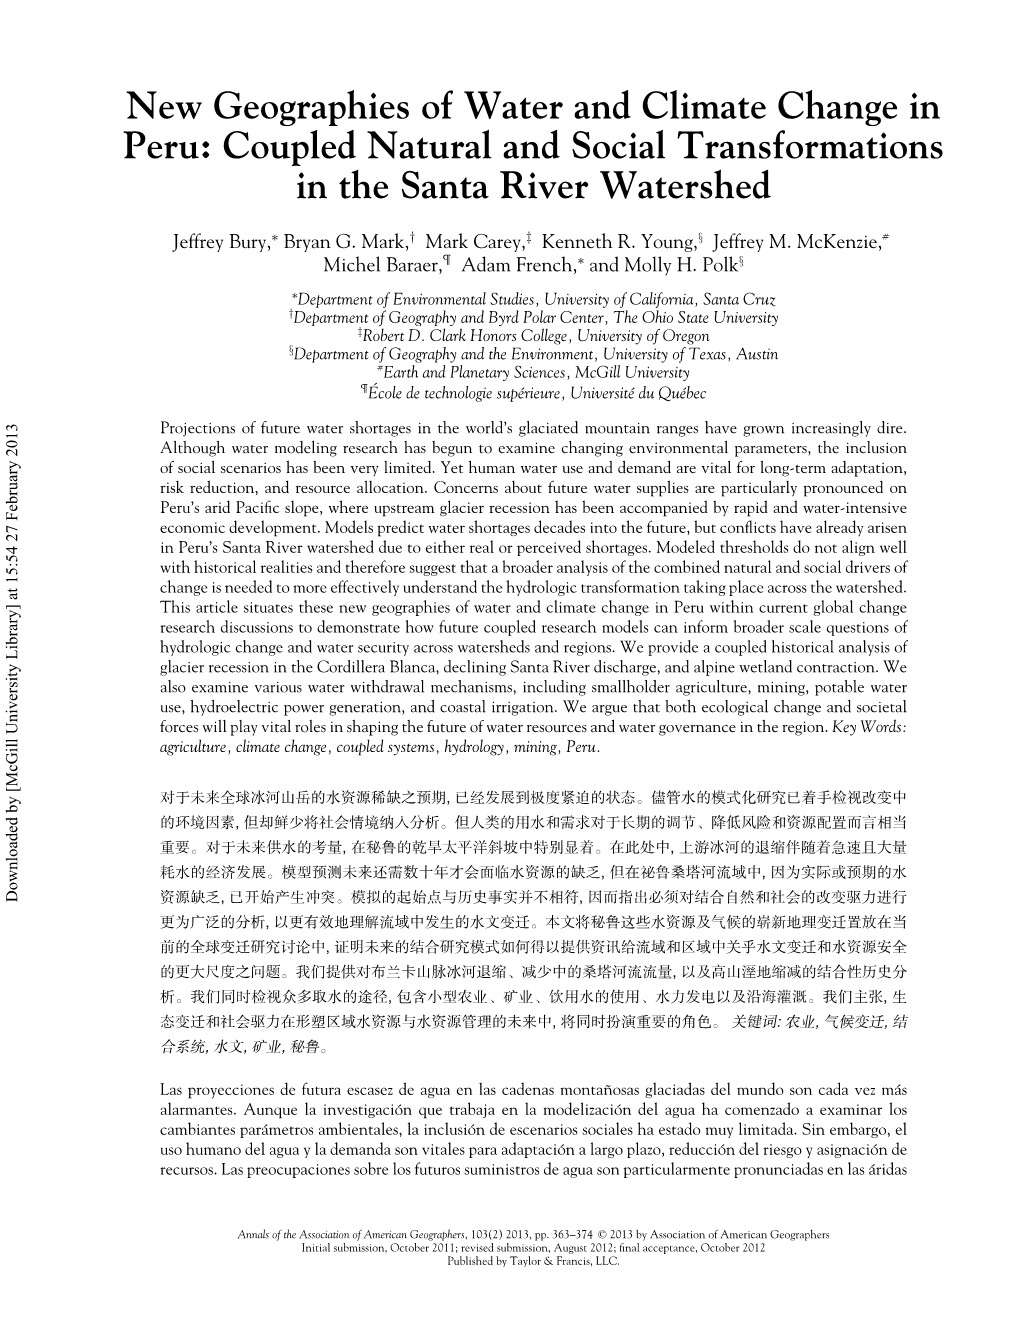 New Geographies of Water and Climate Change in Peru: Coupled Natural and Social Transformations in the Santa River Watershed